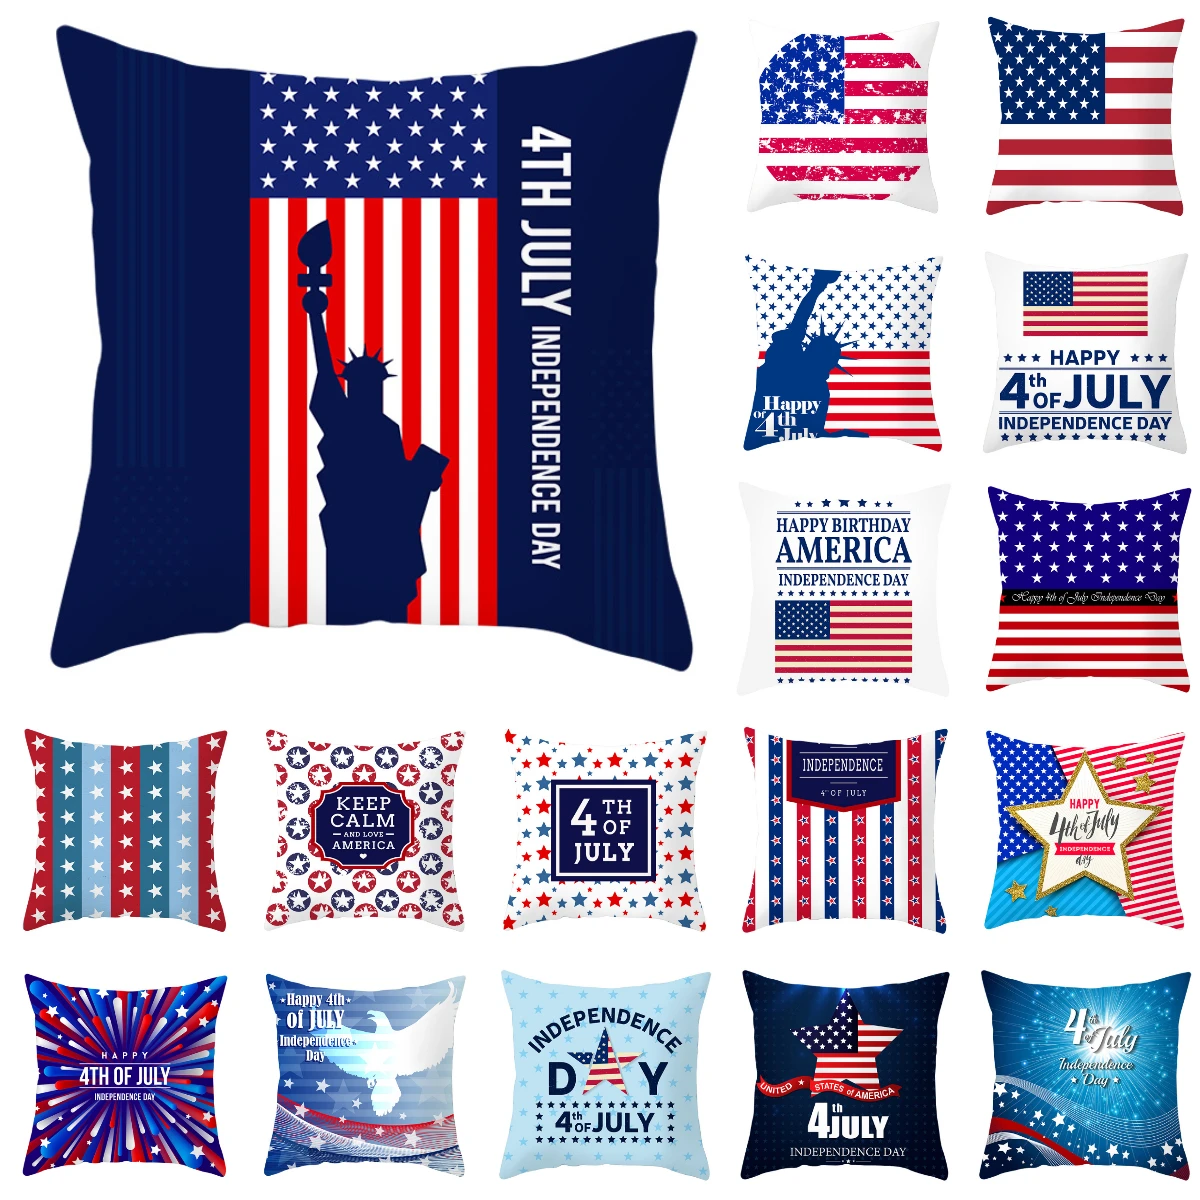 

USA Independence Day Cushion Cover National Flag Print Star-Spangled Banner Pillows Cover Sofa Decorative Polyester Pillows Case